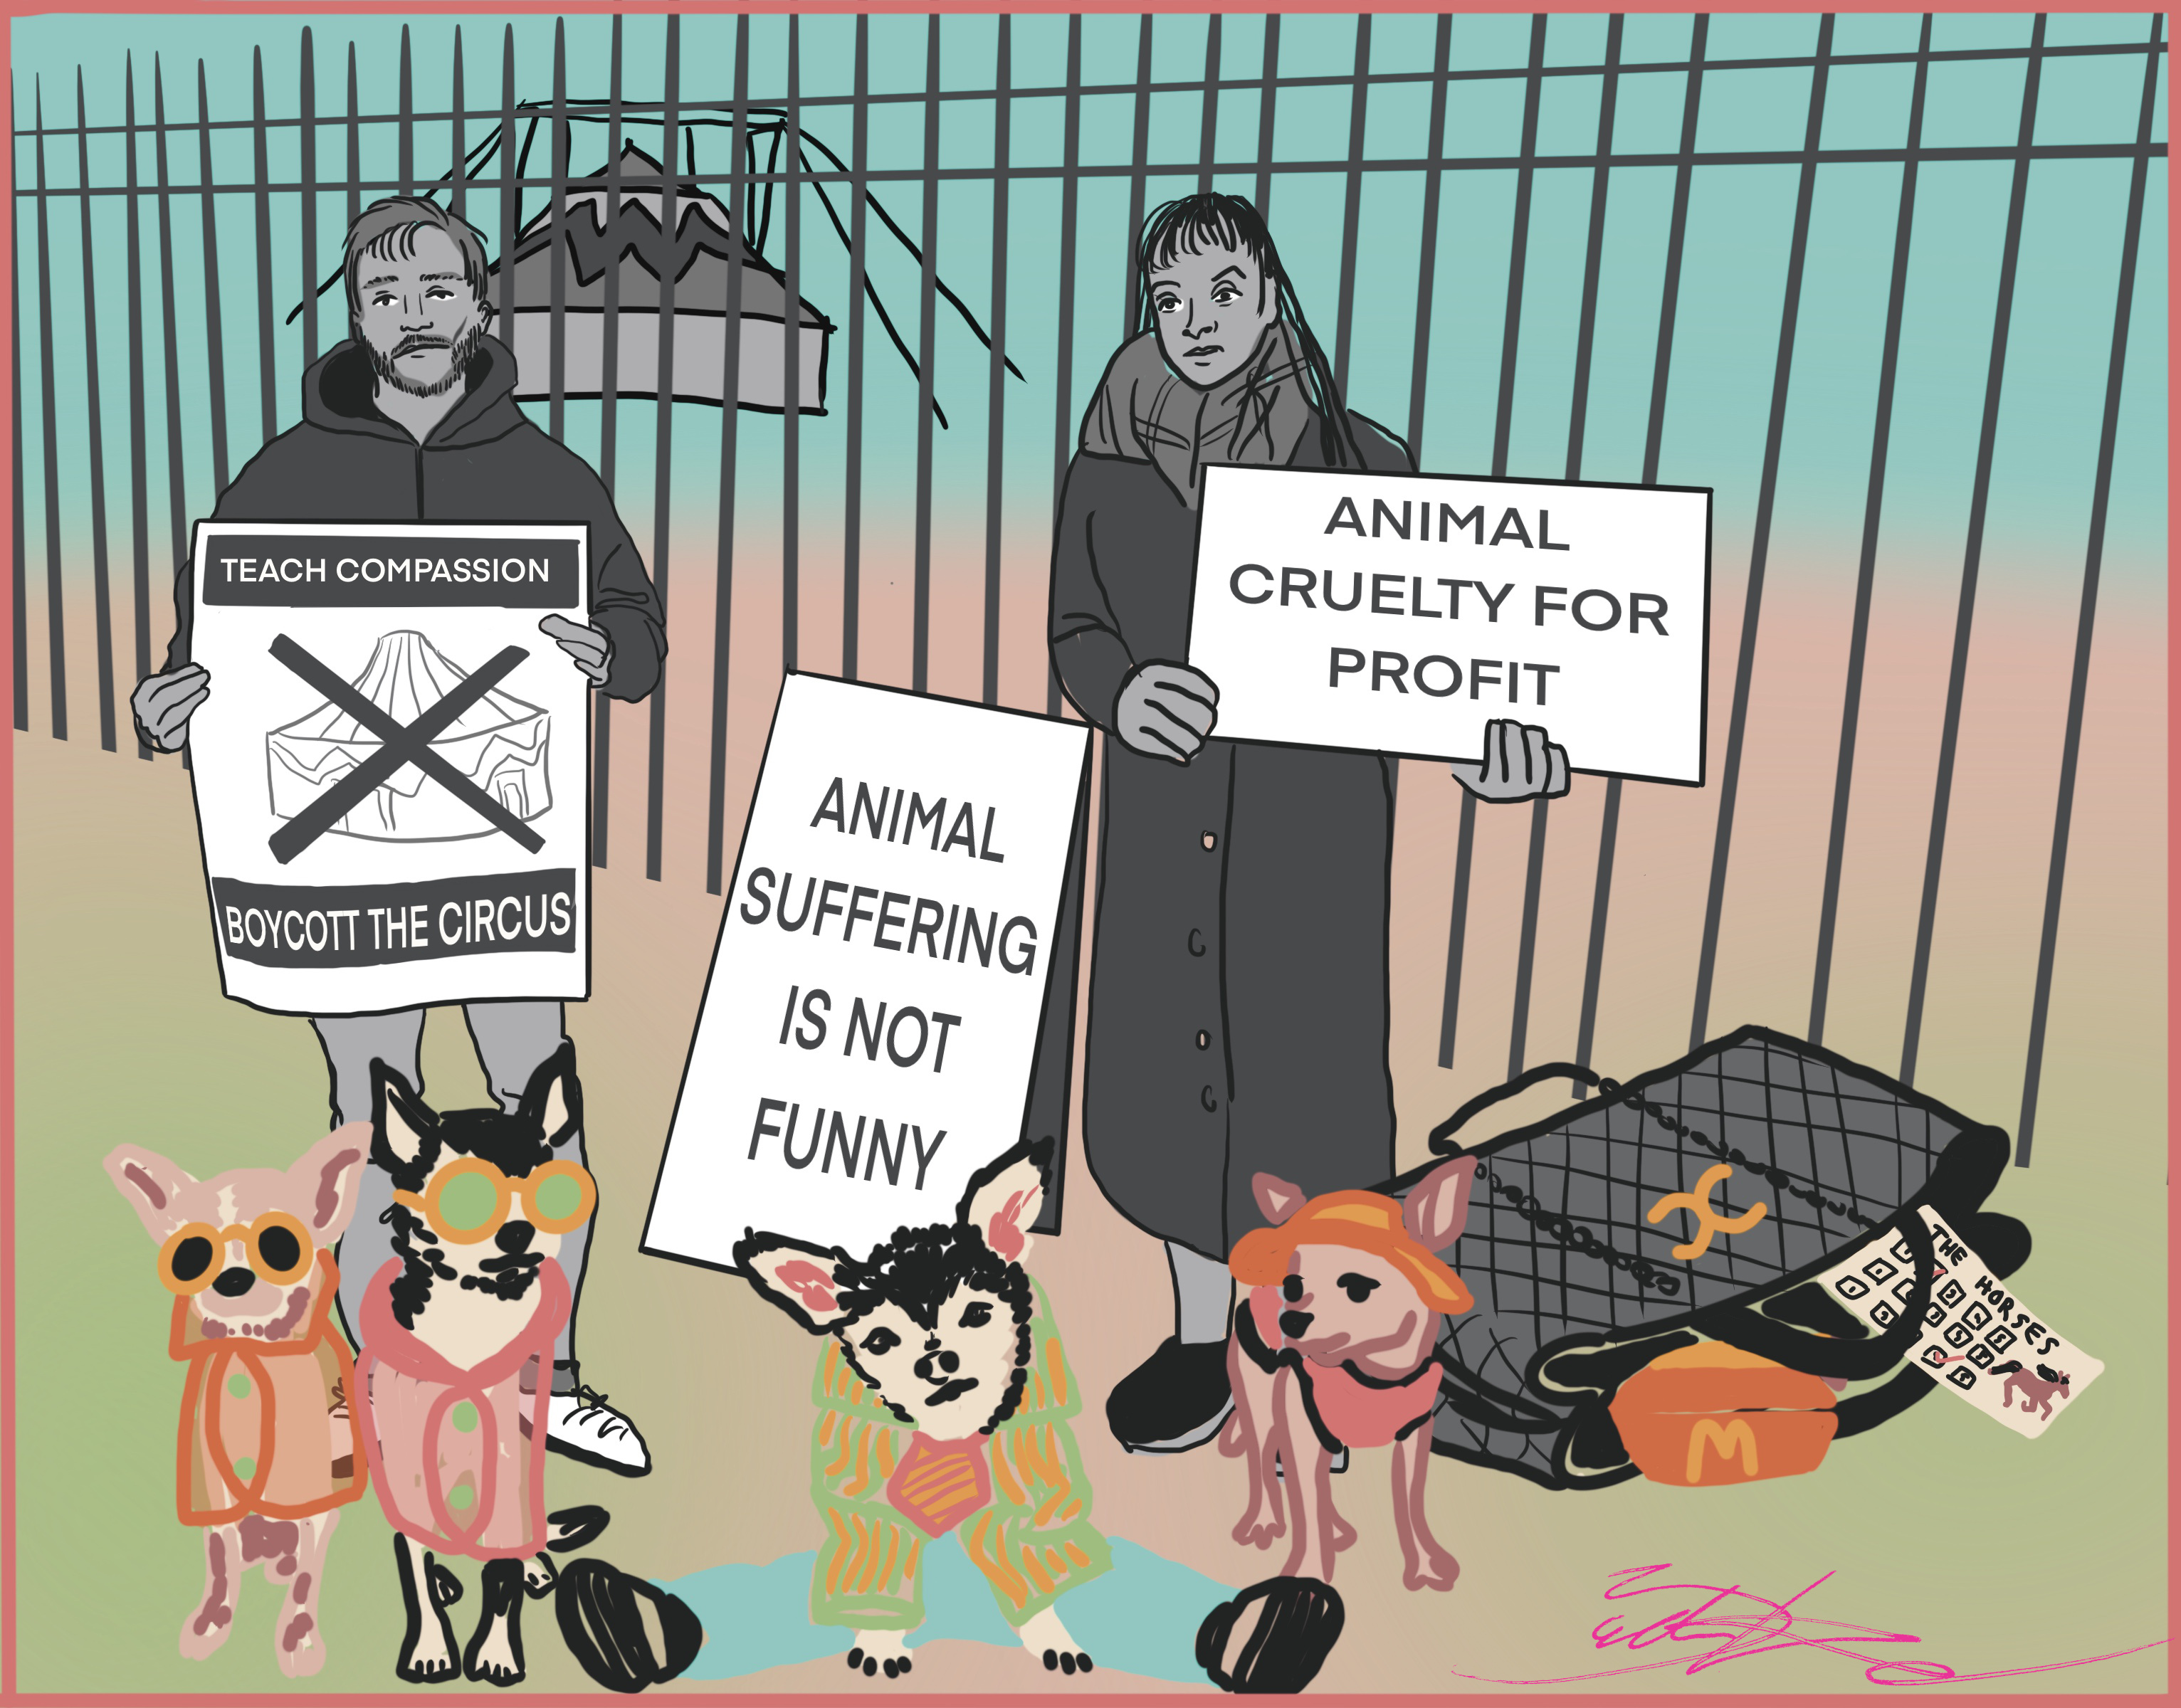 In the sixth illustration of the It’s not a game -series, there is a circus tent behind barriers. In front of the barriers two persors are manifesting against the circus with banners saying ”teach compassion, boycott the circus” and ”animal cruelty for profit” and ”animal suffering is not funny”. In the foreground, you can see 4 small dogs dressed in human clothing and sunglasses, a leather luxury brand bag, a gambling ticket for the horse race, and a fast food box.